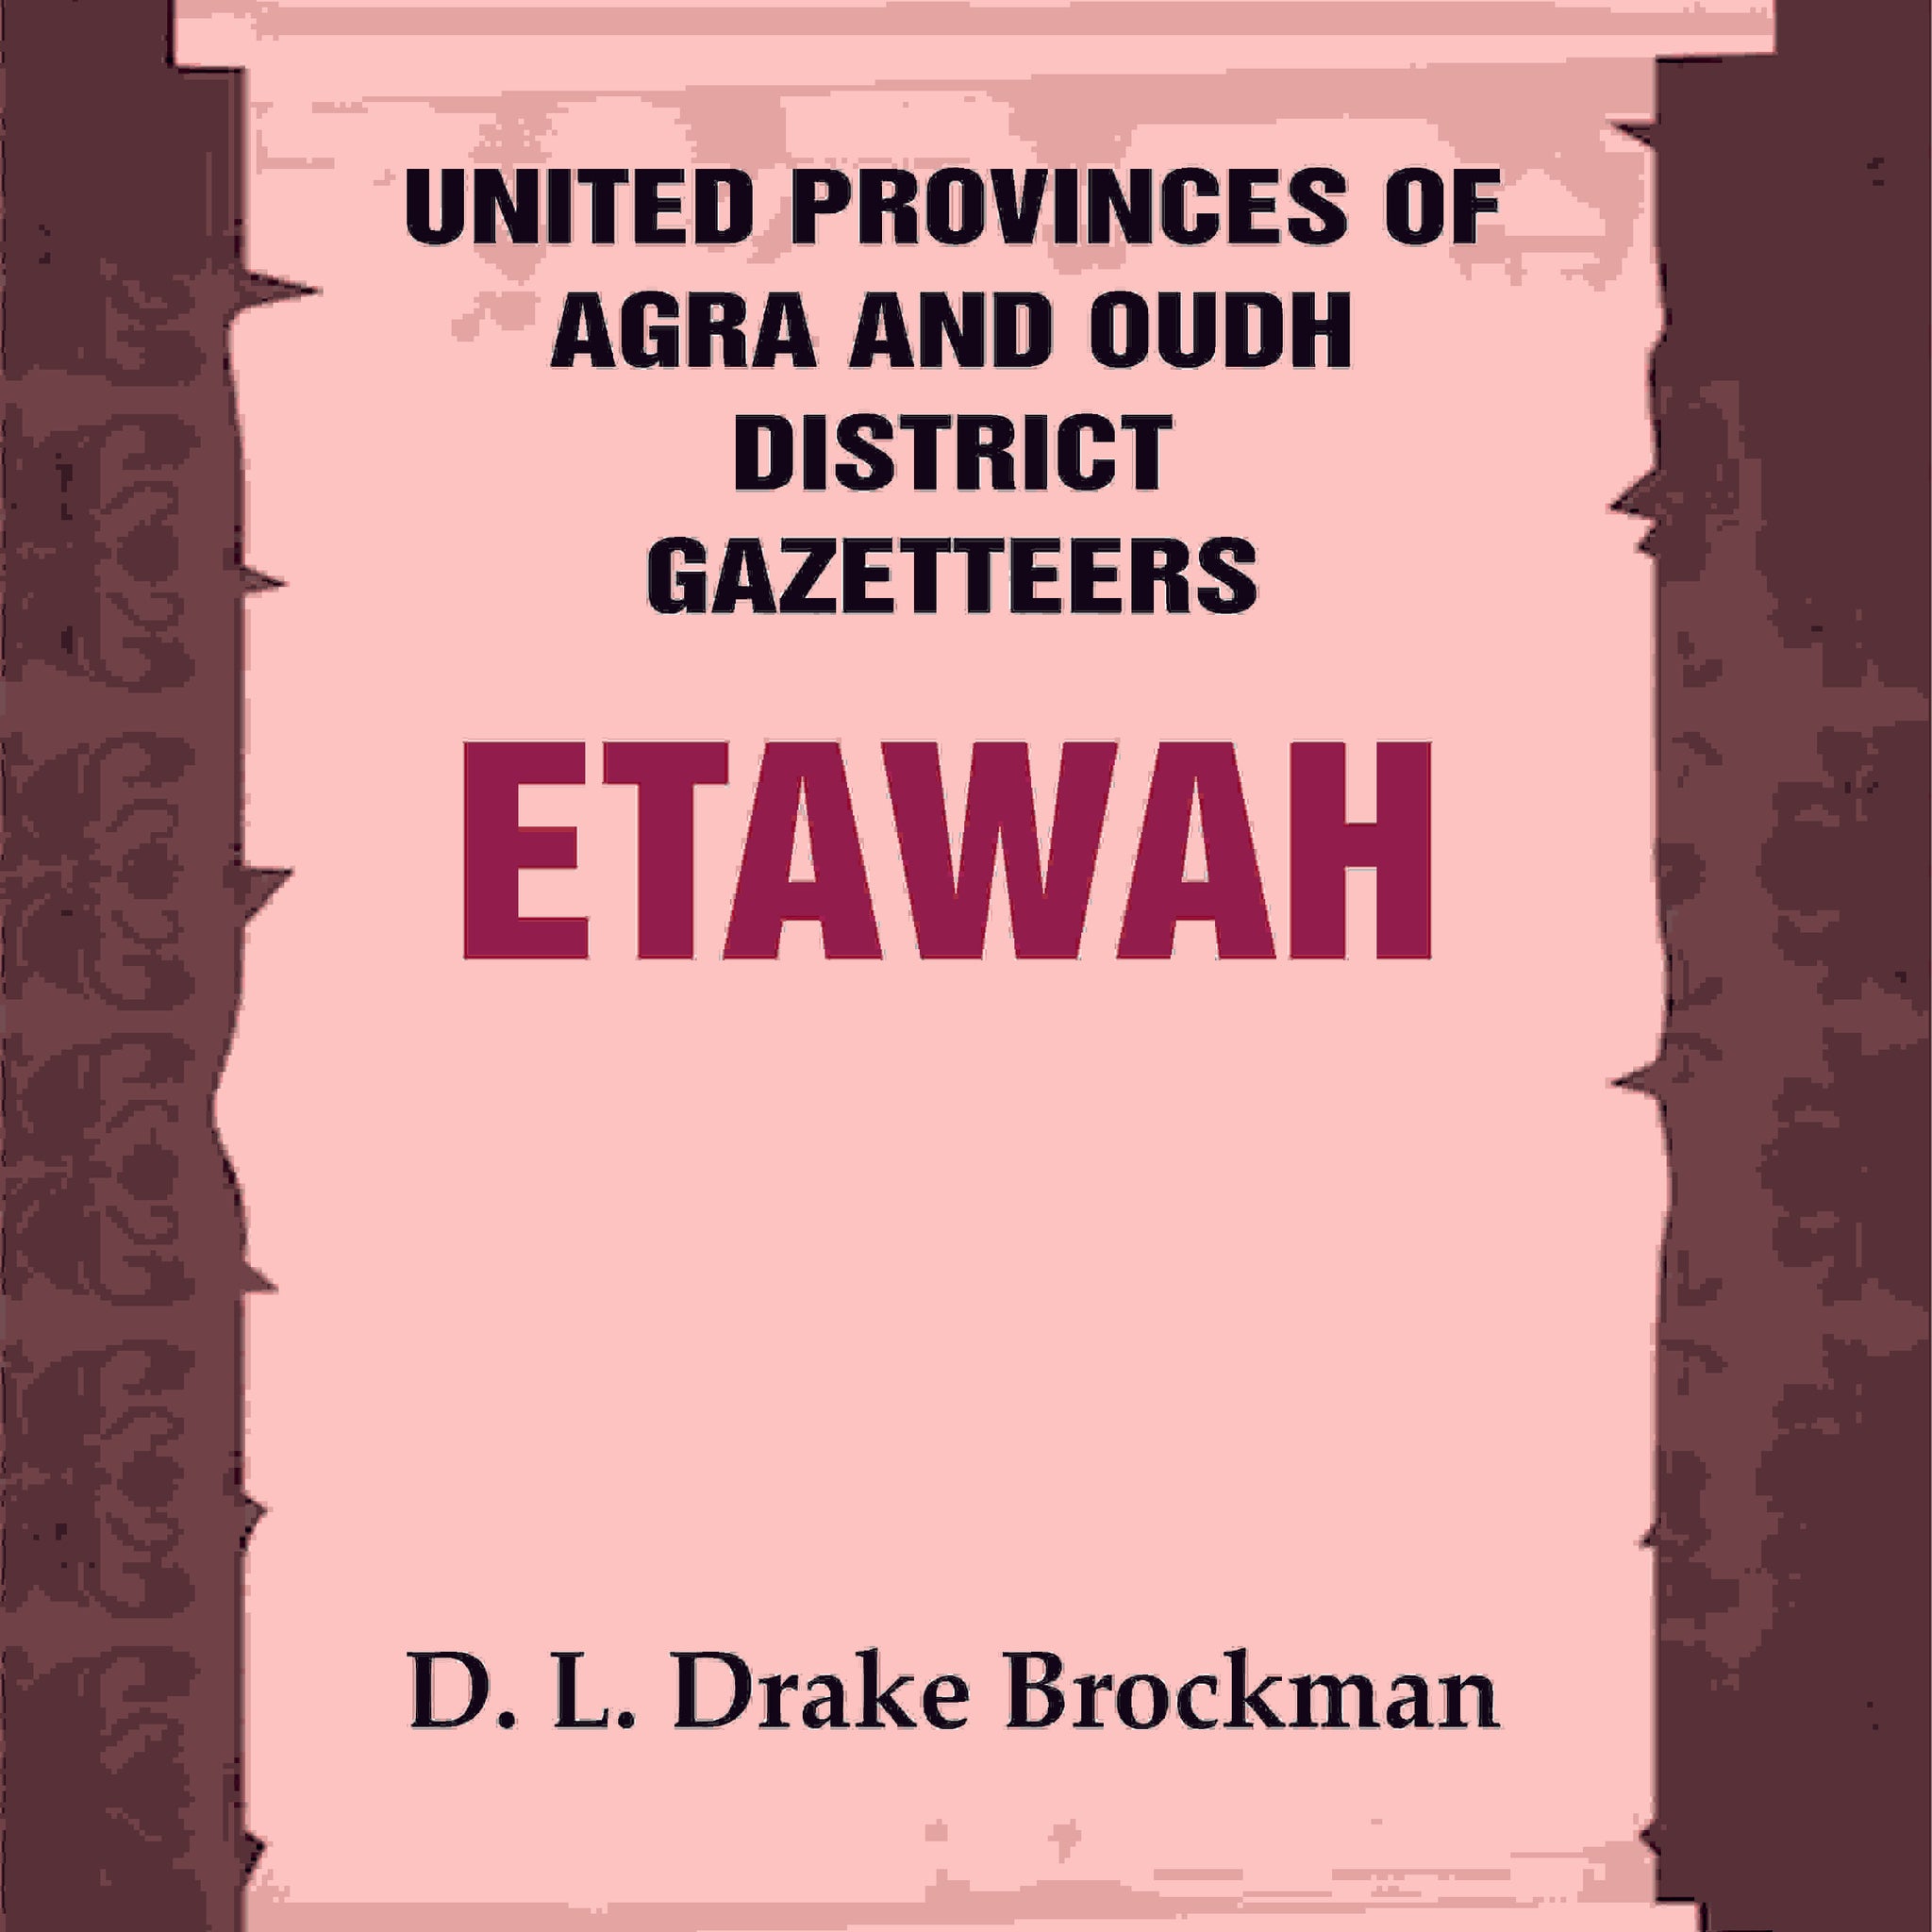 United Provinces of Agra and Oudh District Gazetteers: Etawah